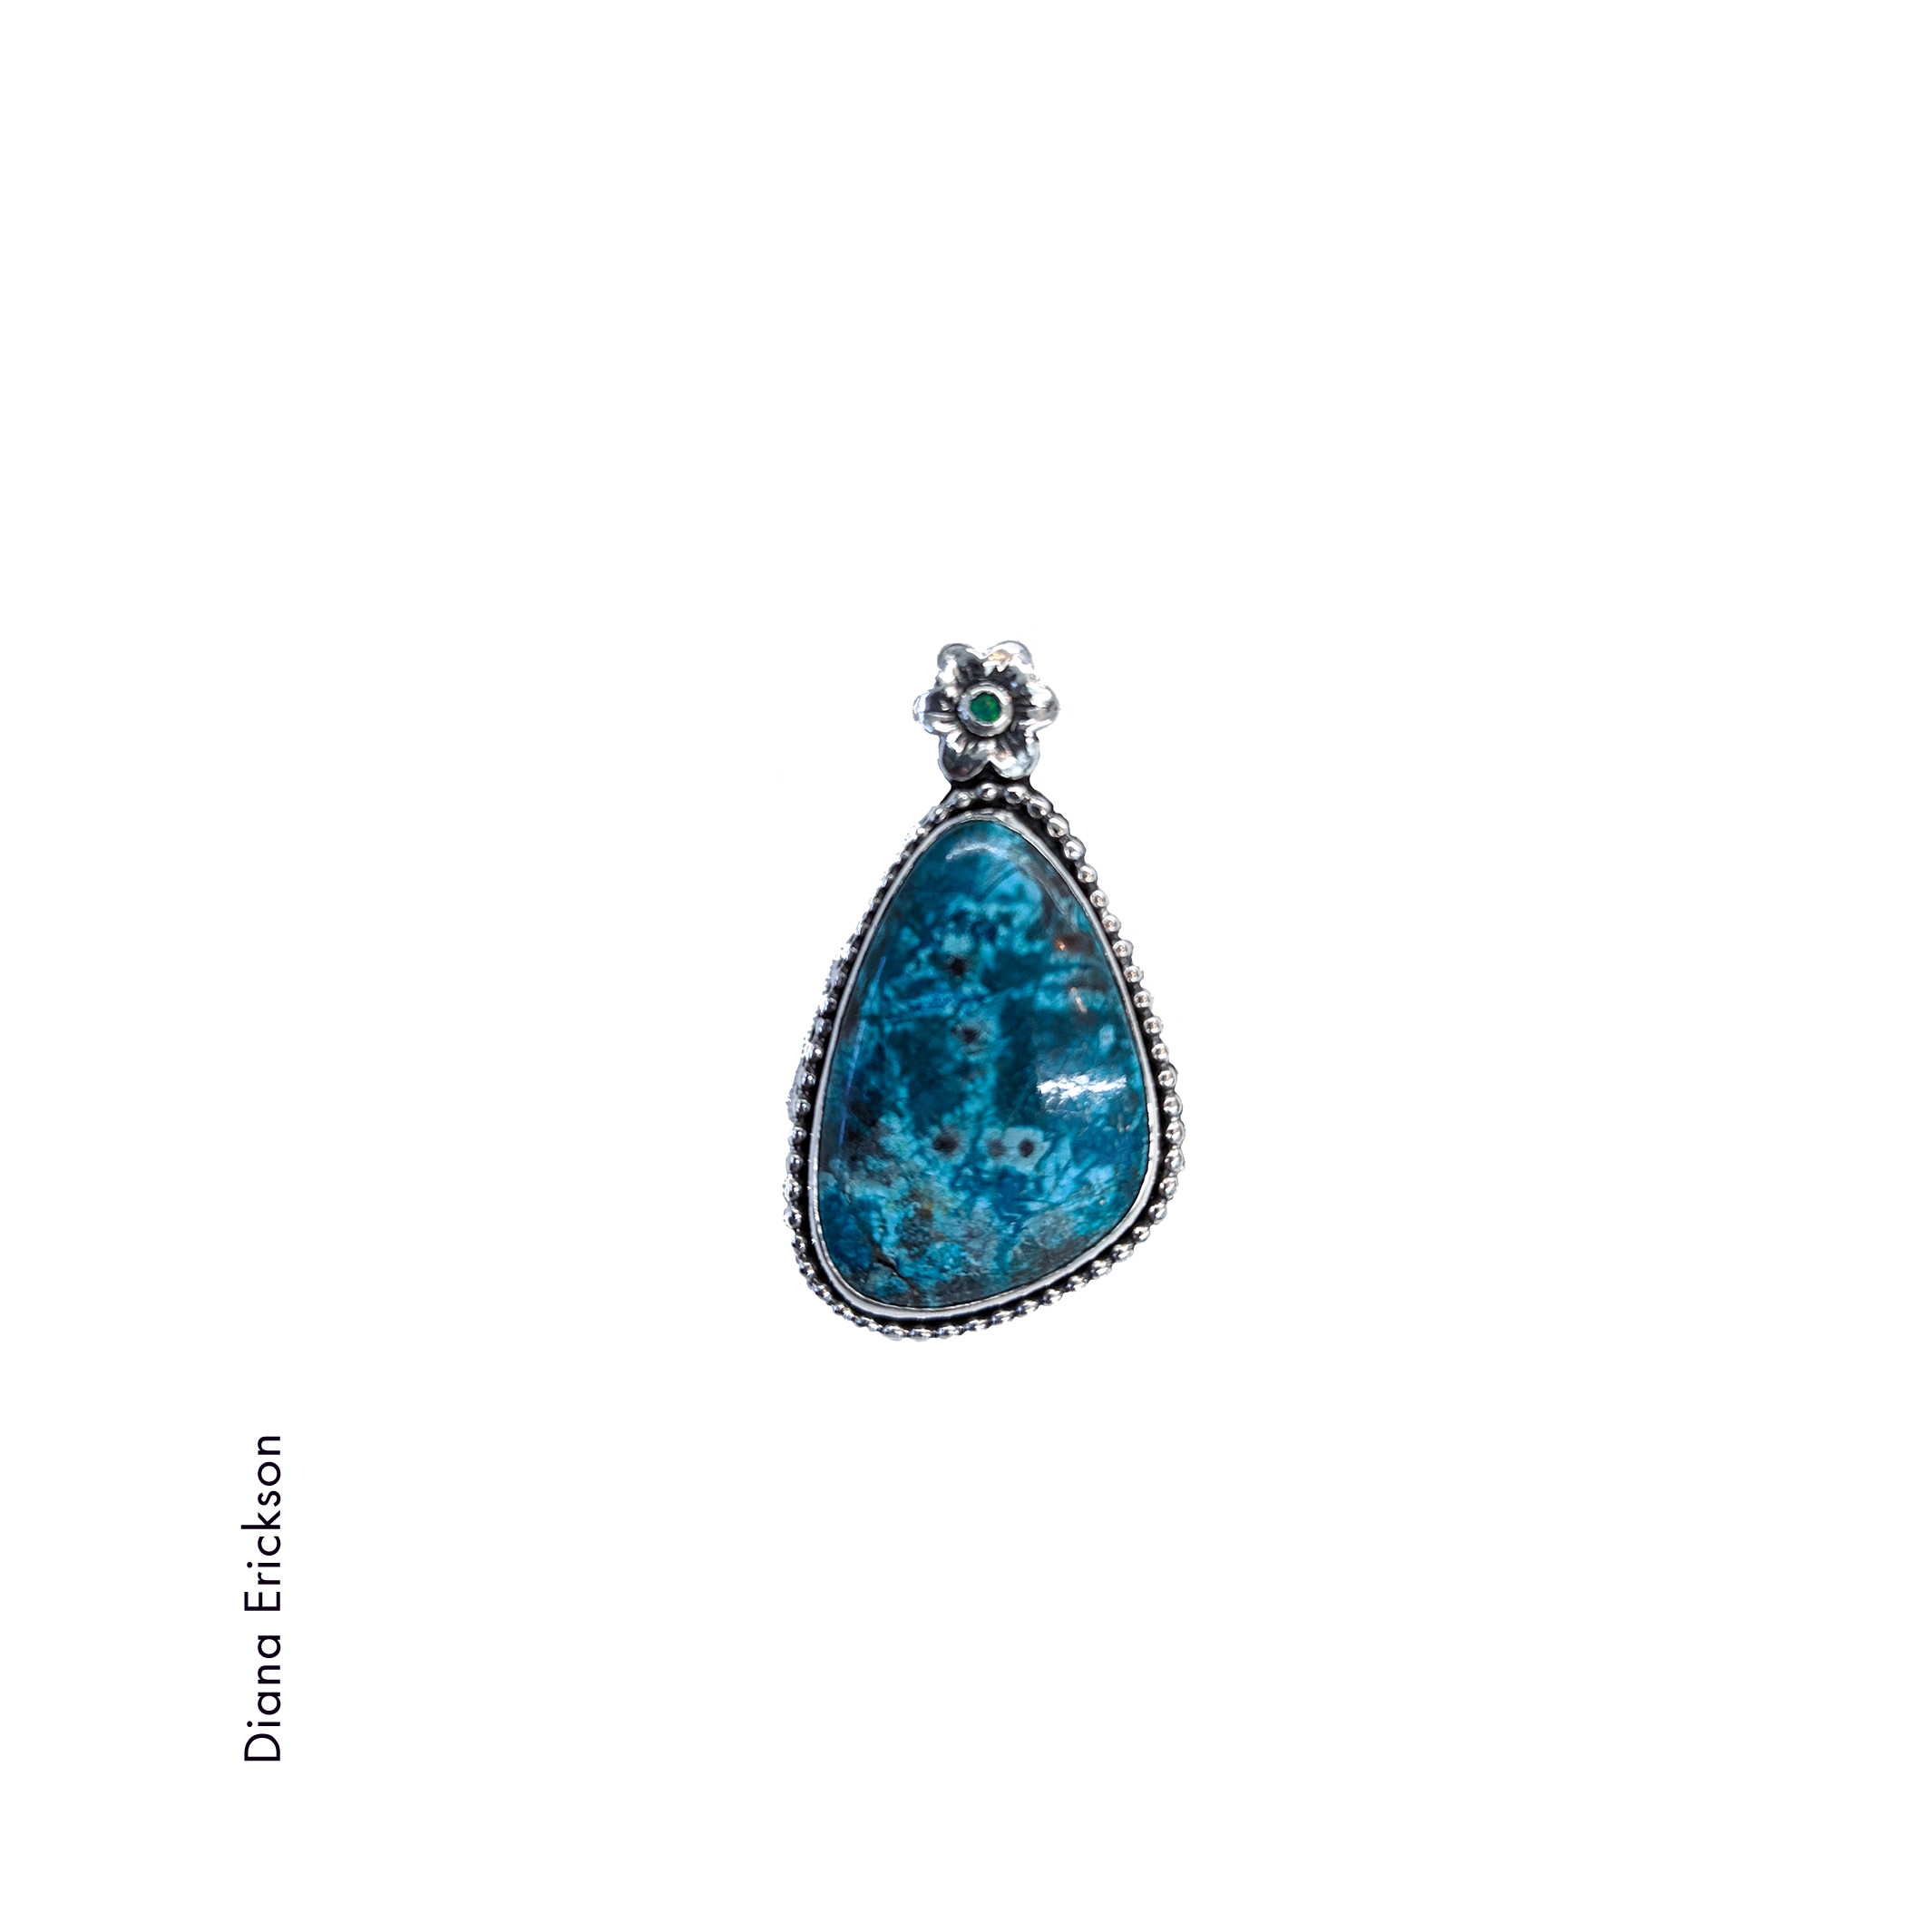 triangular deep blue turquoise stone with beaded sterling silver bezel and a silver flower / bail by Diana Erickson